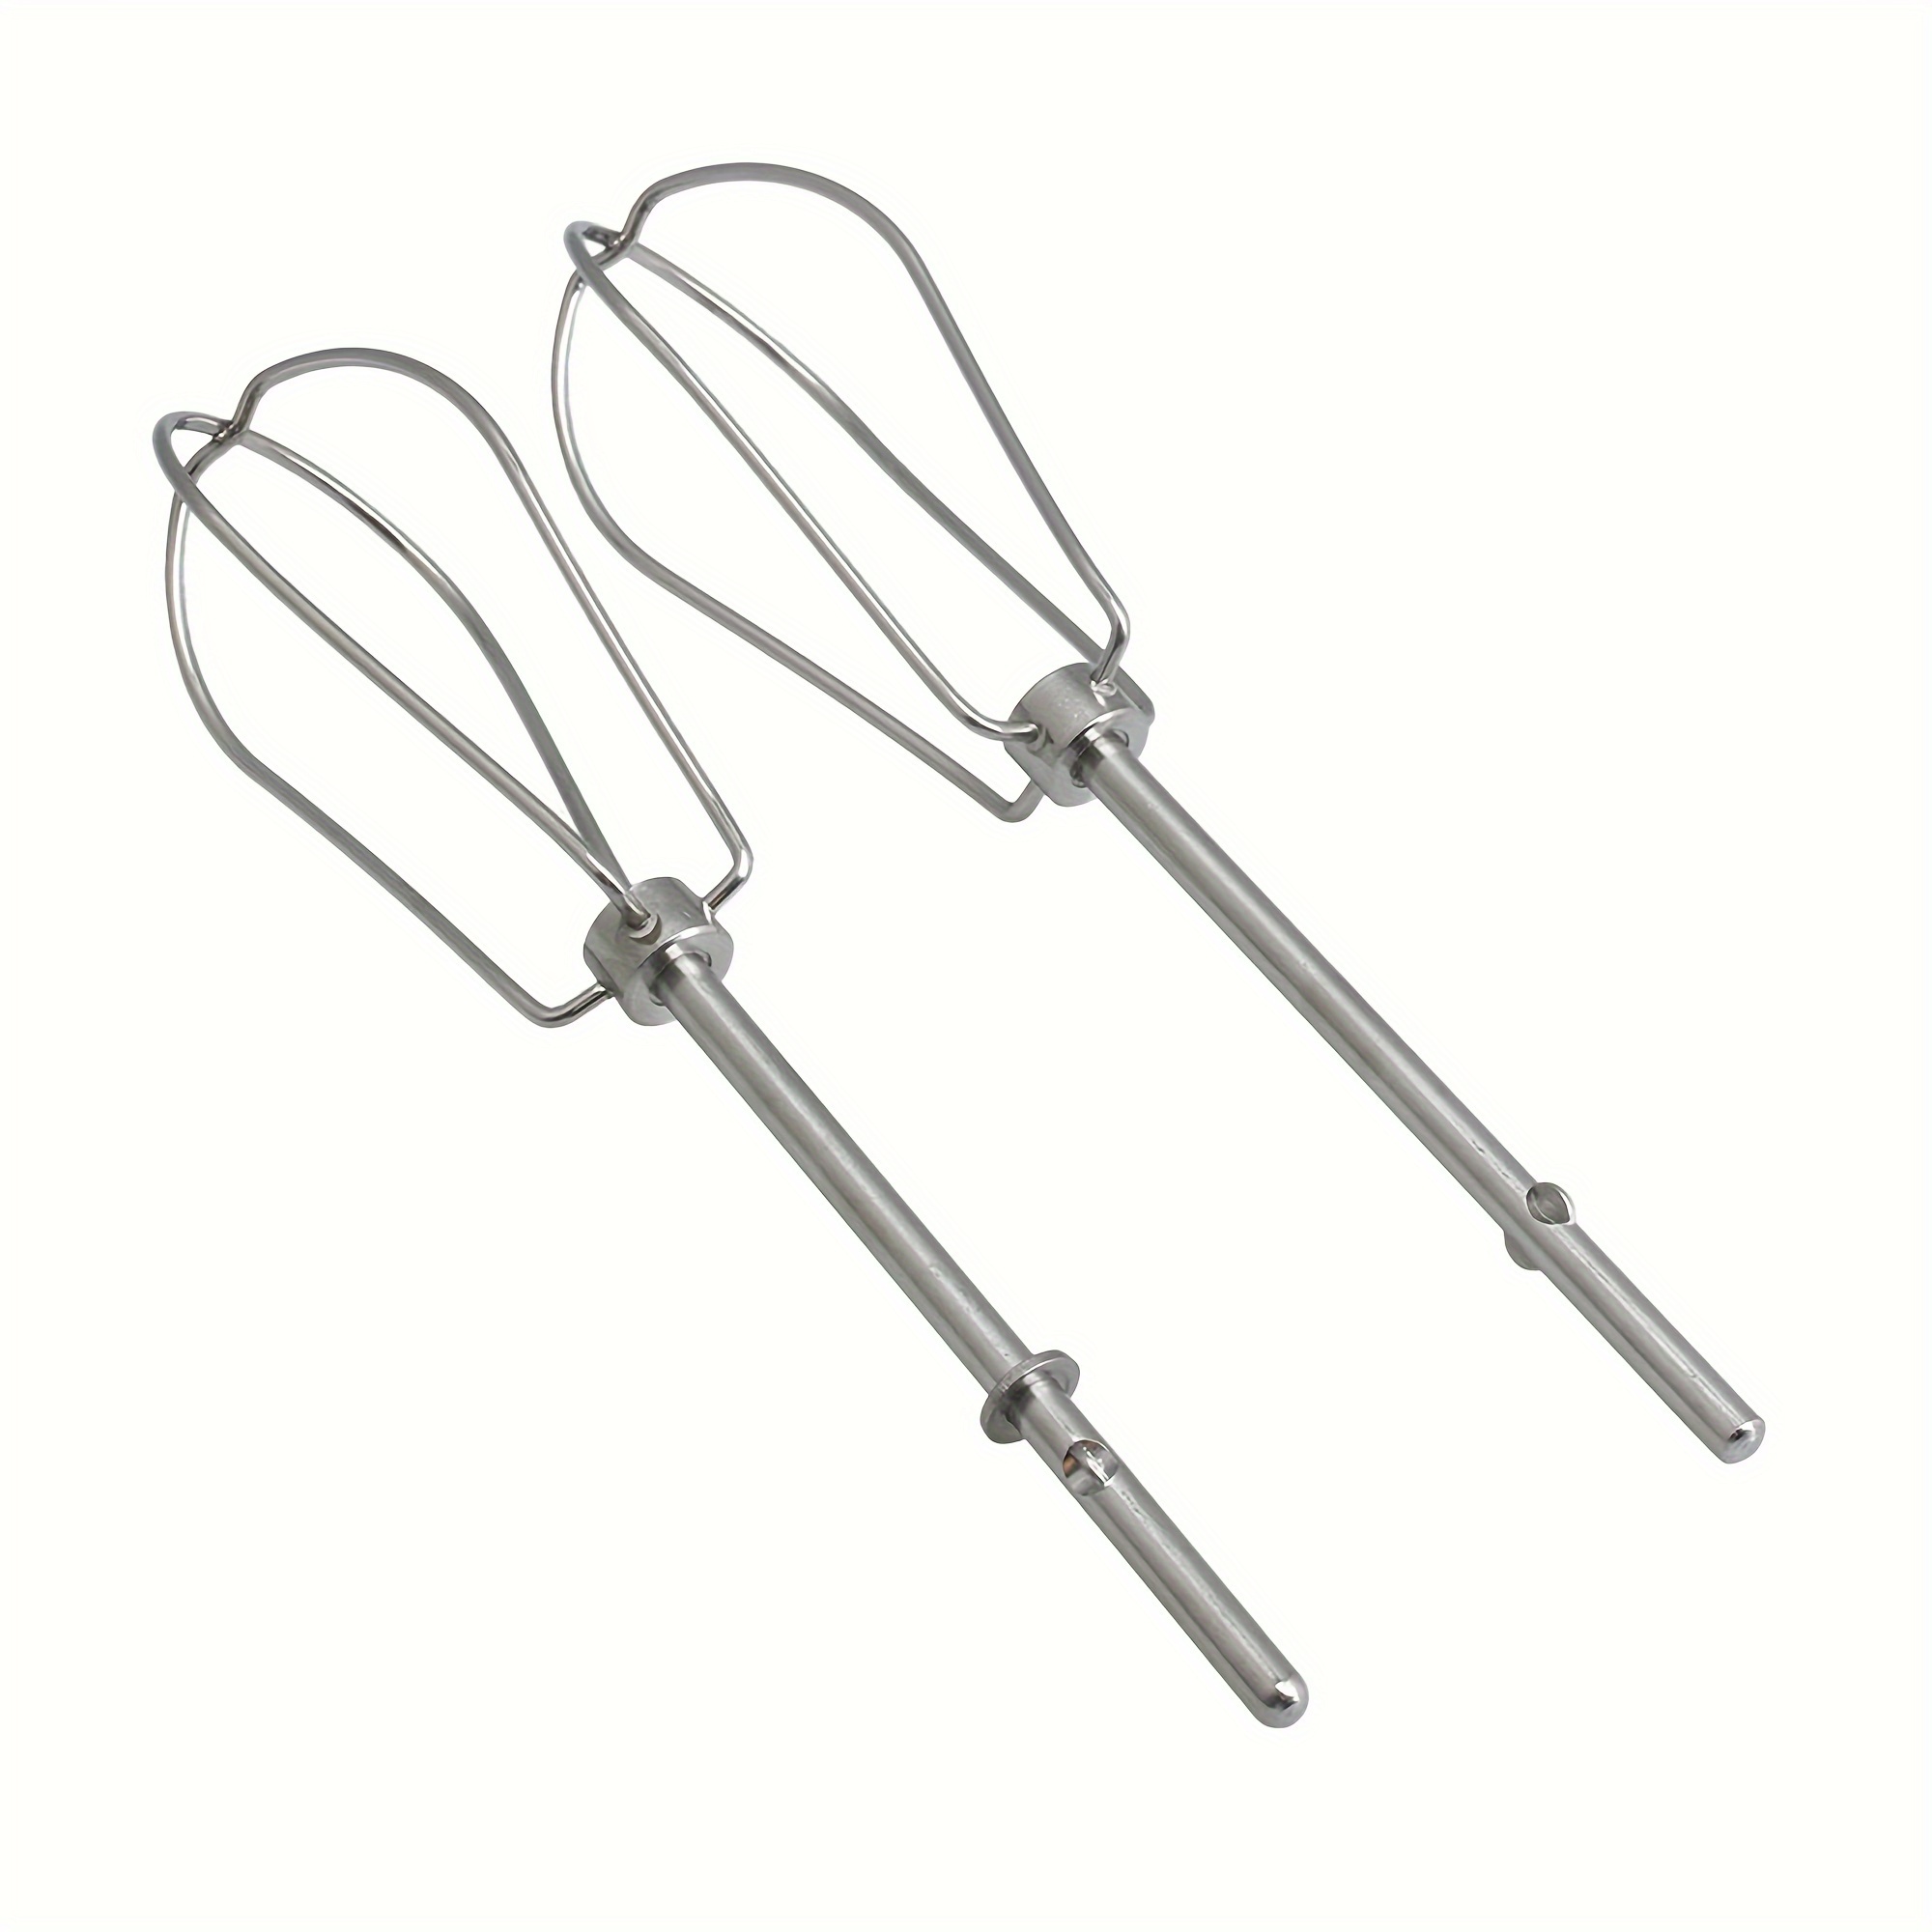 

2pcs Stainless Steel Hand Mixer Replacement Beaters, Model W10490648, For Kitchen Aid Handheld Mixer